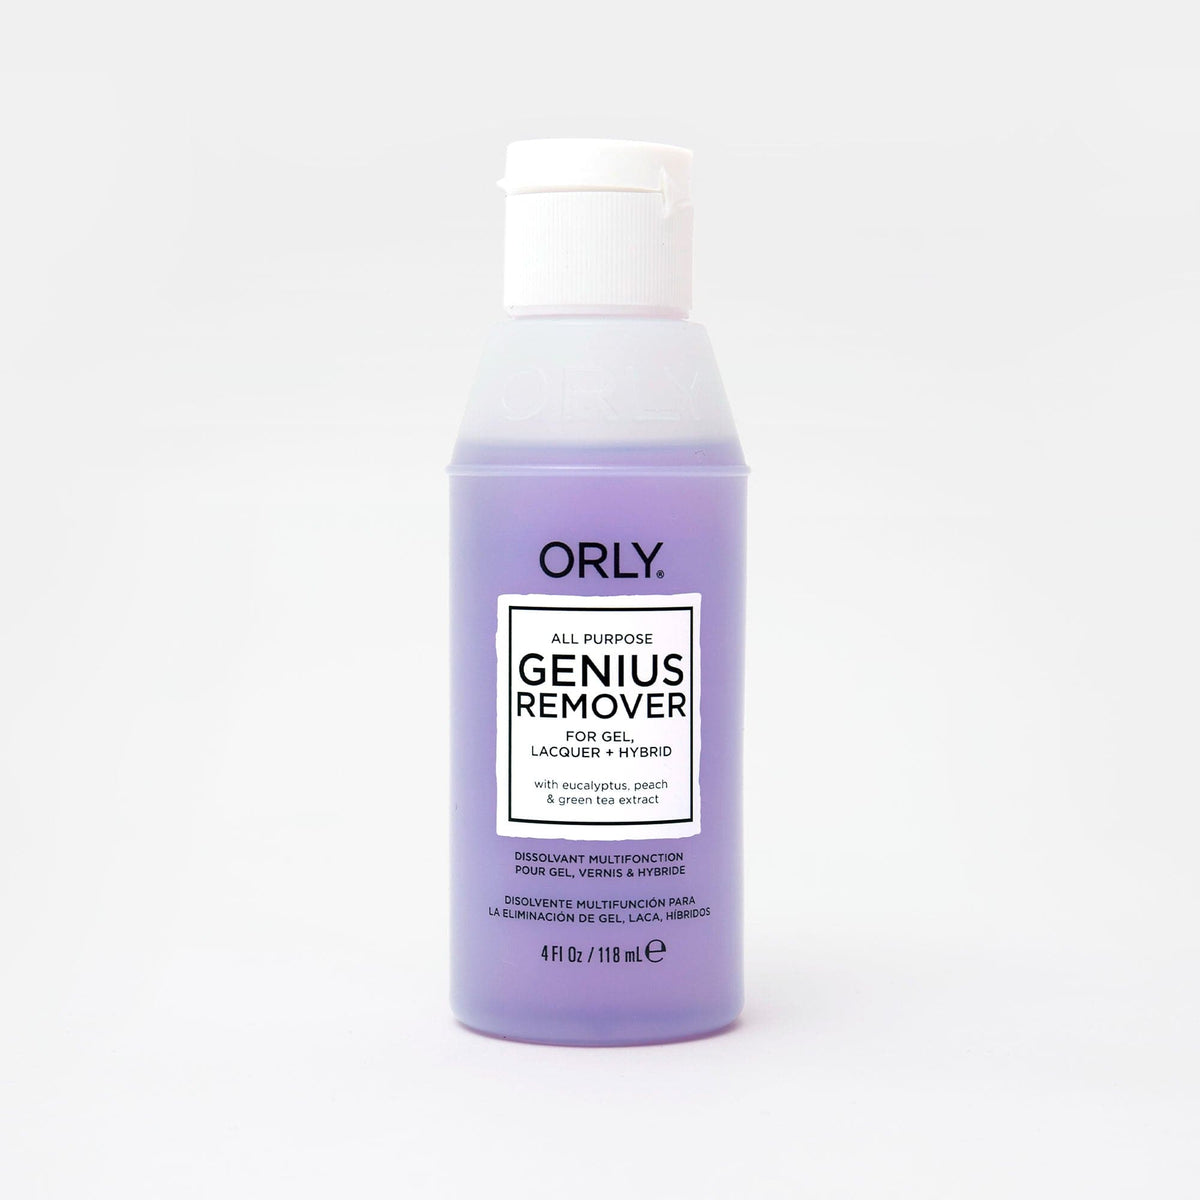 ORLY Genius Nail Polish Remover in 118ml product photo - photographed in Europe